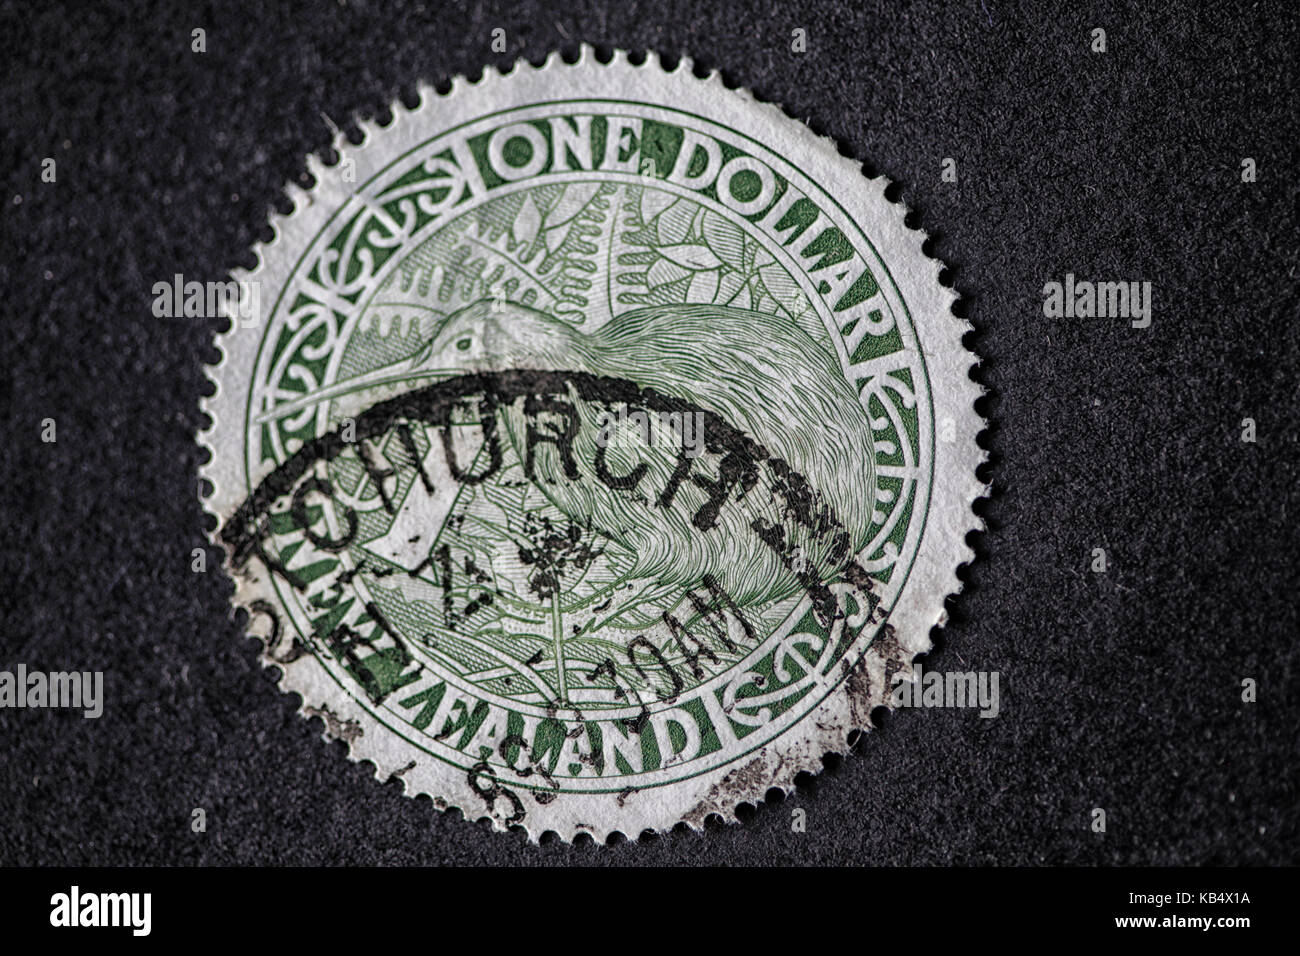 NEW ZEALAND - CIRCA 1994: A circular stamp with a kiwi printed in New Zealand shows 'one dollar', circa 1994 Stock Photo